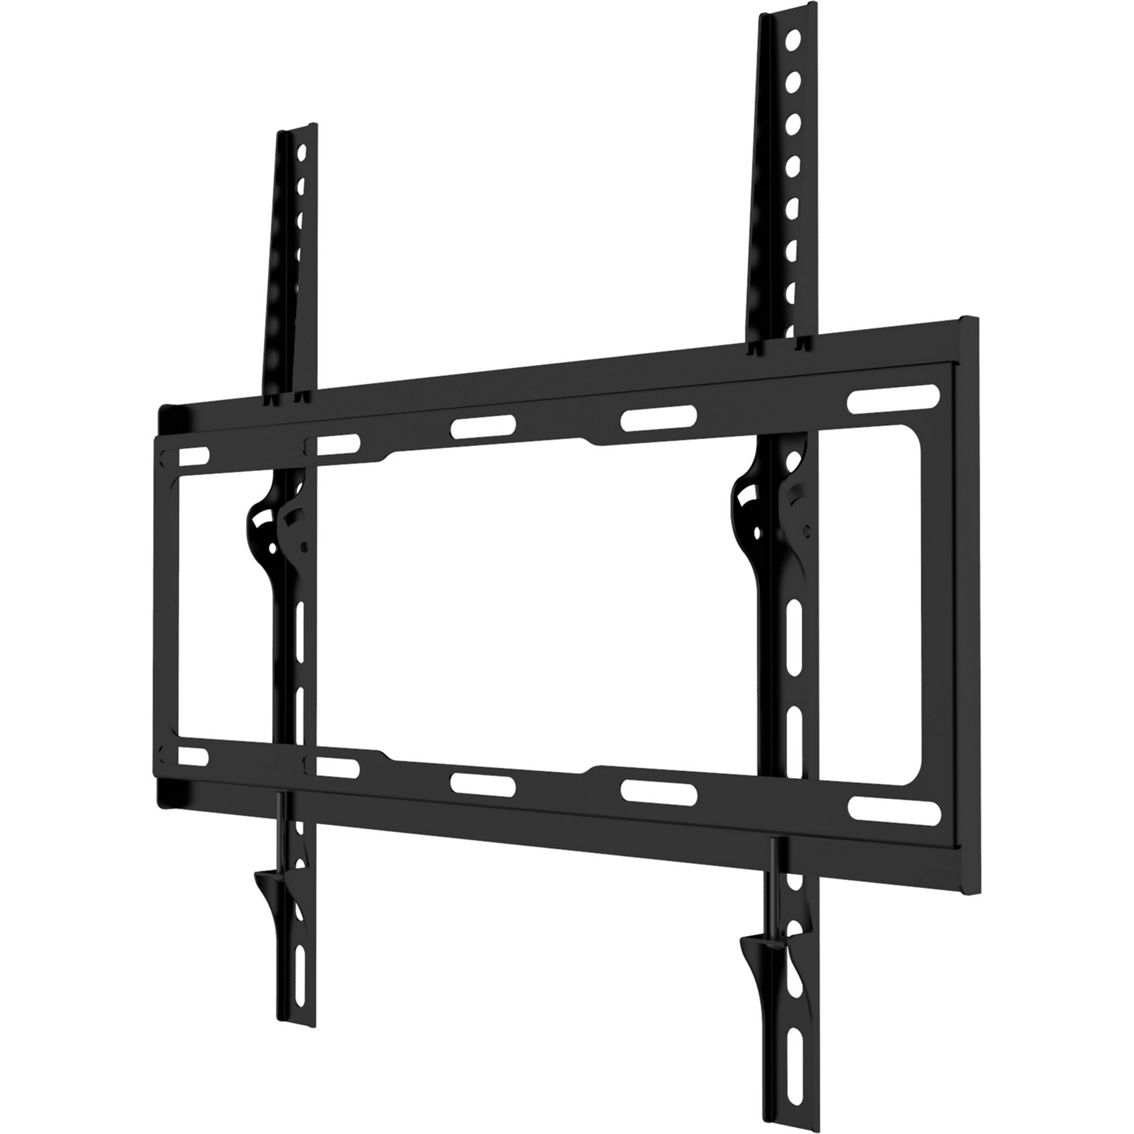 ProMounts Low Profile Fixed TV Wall Mount for 32 - 60 in. TVs Up to 100 lbs. - Image 3 of 9